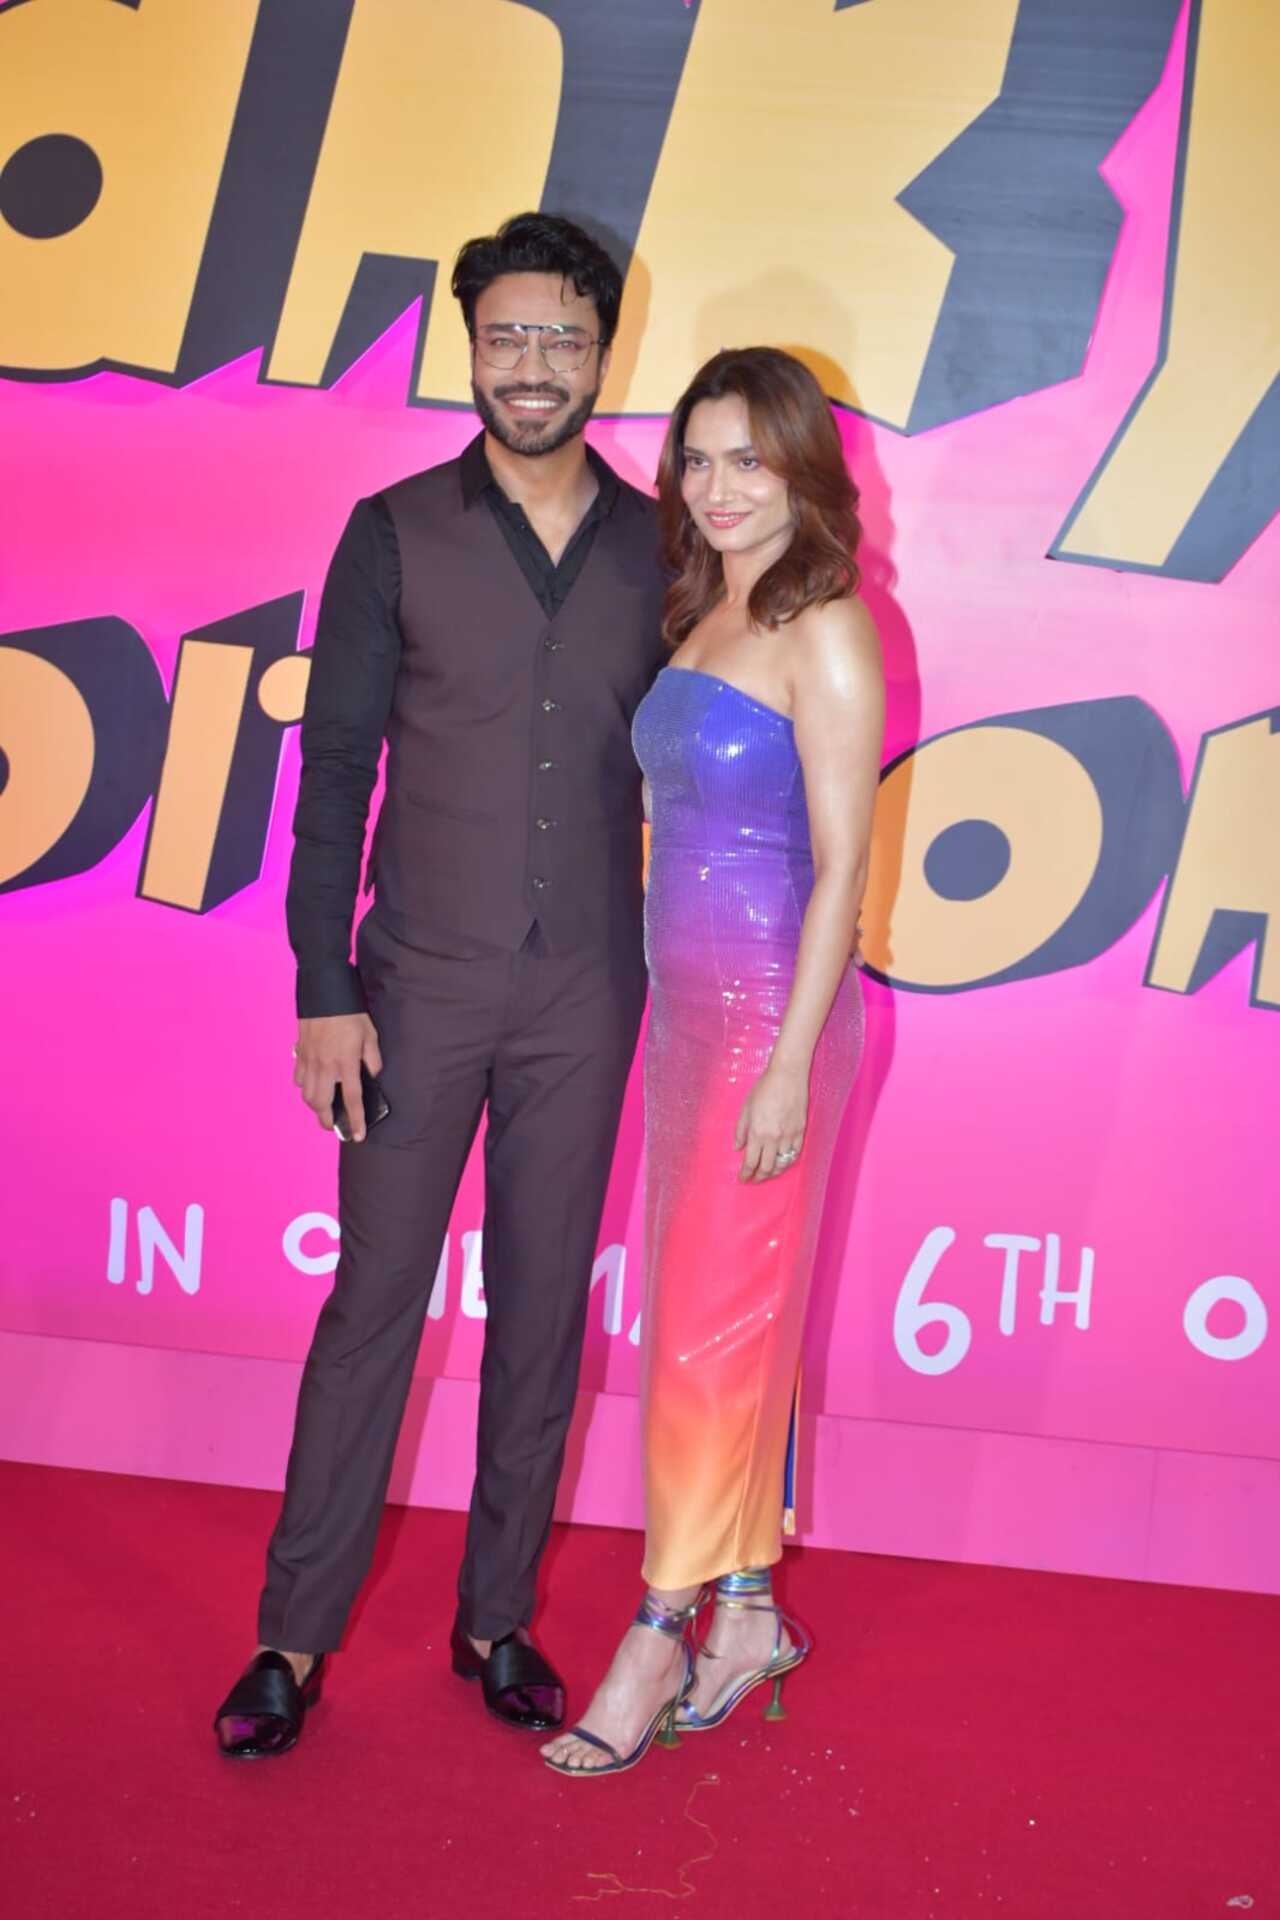 Ankita Lokhande attended the premiere with Vicky Jain